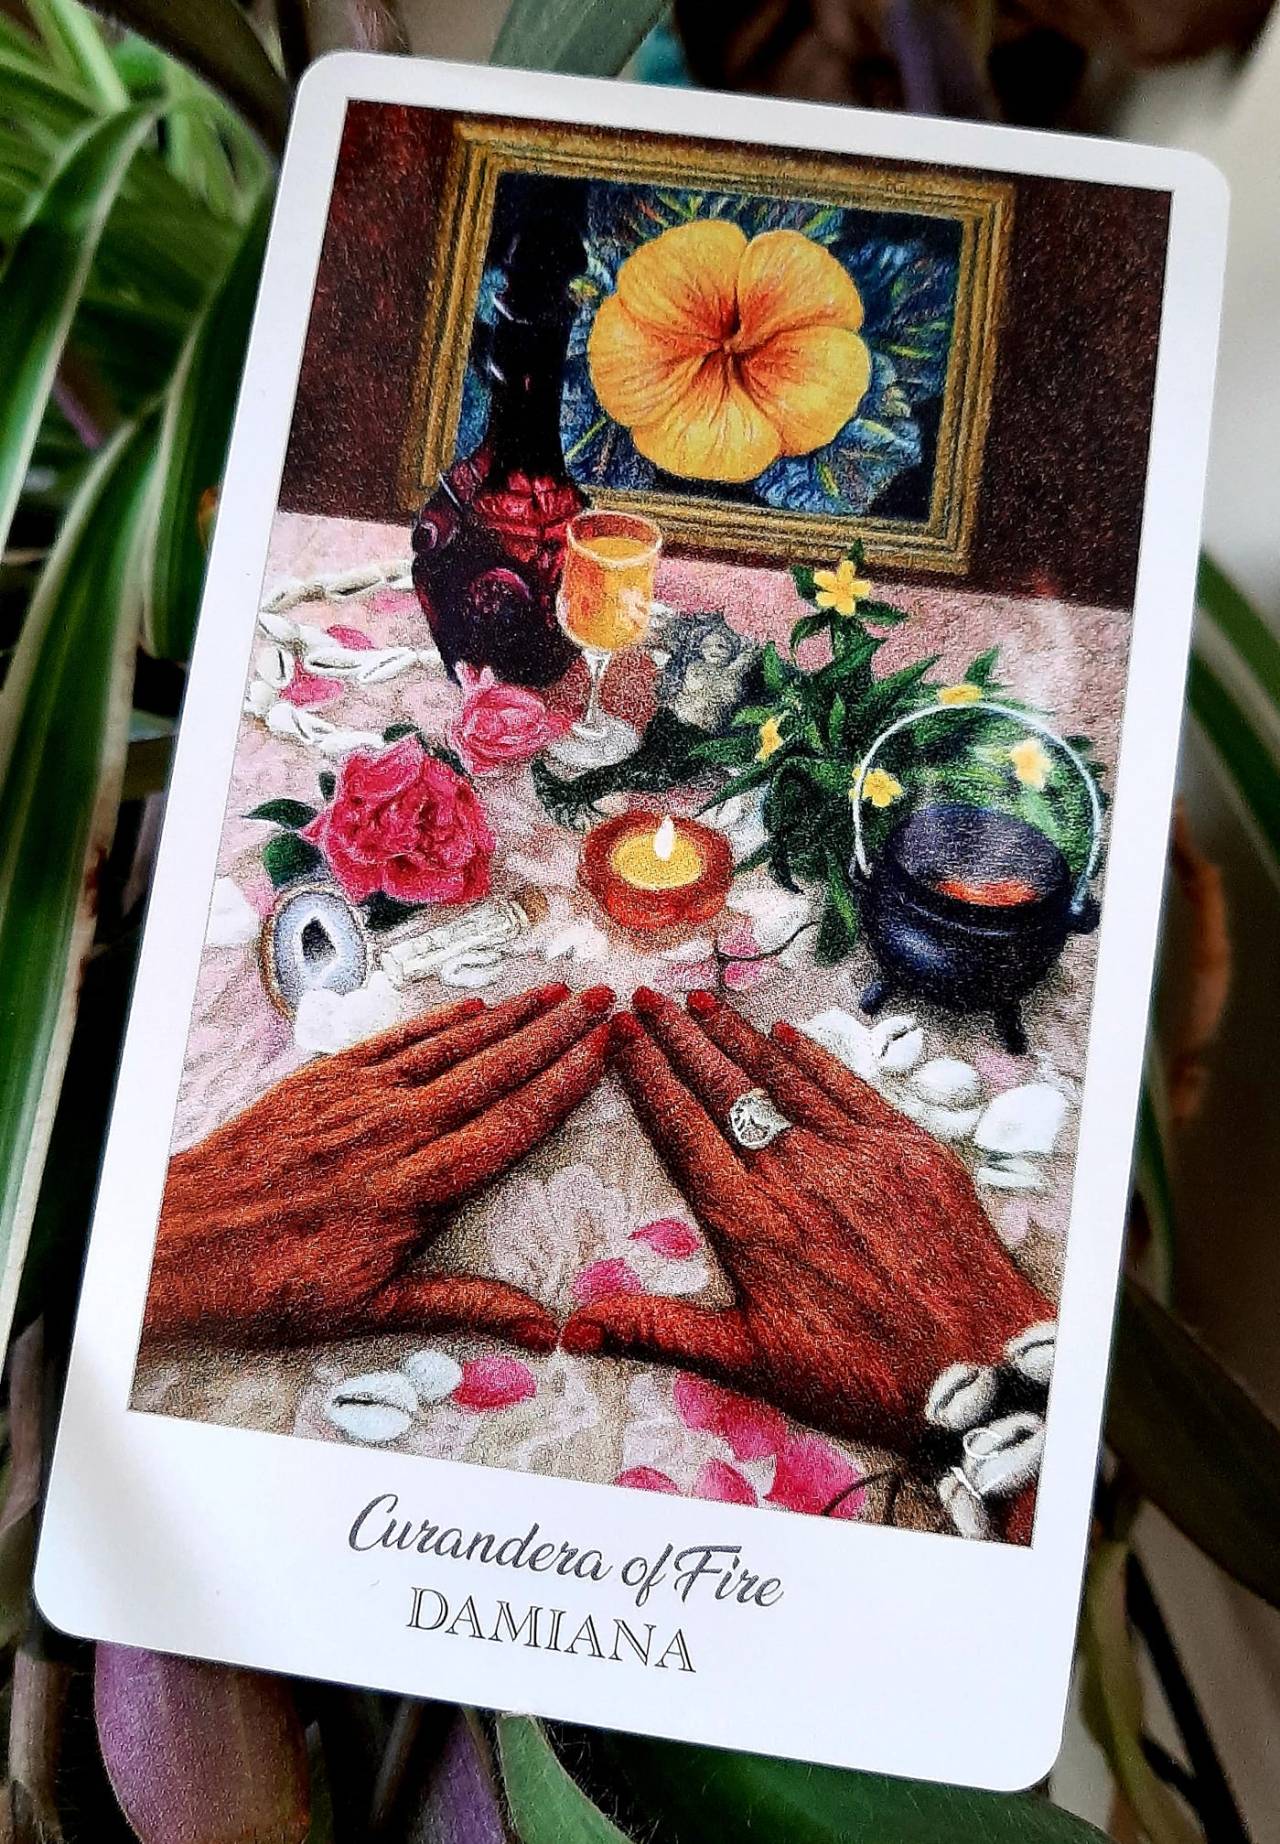 Card for Wednesday, May 11th, 2022Curandera of Fire
paired with 
Damiana (Tunera diffusa)The Suit of Fire, equated with Wands or Batons in other decks, is considered the realm  of action. Here we see that heat can be used to both incite and heal. The herbs chosen for this Suit are spicy, fiery, intense. Typically not used as tonics, these herbs are most often employed in the moment or added in small amounts to formulations as activators, transformed through alchemical processes to release their heat.In The Herbcrafter’s Tarot, the charge of “King” has been given to the Curanderas - the Healers - of each Suit. These cards depict age-old, traditional herbs with a long legacy of healing, carrying to us the wisdom of our Elders. We are told that the Curanderas represent faith in the mysterious and call to us, softly but insistently, to have curiosity about an outcome. The Curanderas, as their suit placement dictates, are also the Keepers of their chosen Elements. They are Guides who offer us the gift of Generational Wisdom, showing us how to preserve and protect that which we value in this life.In addition, the Curandera or King of each Suit represents the culmination, the final authority, of that Suit or Element. Kings, as their position suggests, have learned through experience how to set and respect boundaries, how to exercise patience, how to best offer wisdom and support. King are the apex of integrity. The Curandera of Fire reminds us to love ourselves. With the triangle representing feminine power prominently displayed, we are being encouraged to connect with our feminine side. The Curandera of Fire is passionate about living what we love. We are being reminded to delight in ourselves today as we allow creativity and inspiration to direct our action. Damiana, spicy, warming, and bitter, is best known, historically, as a mild type of aphrodisiac.  Tracing its history back to the Guaycura and Aztec societies of Central and South America, Damiana was originally reserved primarily for ceremonial use. Damiana was also used in “love potions”, providing relief from self-consciousness. Rather than attempt to ensnare another, we do better in relationships when we feel good about ourselves. Damiana brings to us a sense of  self trust and self love. As a food, Damiana is mostly used in teas, liquors, infused honeys, and chocolates.Medicinally, Damiana is supportive to all genders, raises energy, gently supports libido, and is a restorative type of nervine, both calming and energizing. Damiana primarily nourishes the kidneys and adrenals, sometimes referred to as “the seat of sexual power”. Both traditionally and in modern medical studies Damiana has show to be effective in the treatment of bladder and urinary issues, depression, anxiety, “nervous” stomach and related ulcers, progesterone regulation, lowered libido, and as an anti hyperglycemic, lowering blood glucose.Today’s card reminds us to reclaim our power through the love of self. Make lifting yourself up a radical act as you find ways honor yourself for being you. This is not an exercise to be taken lightly, as many of us do still struggle, whether through life experience or old imprinting, with identifying the good within ourselves, but, talent and beauty live within each of us. Take a break from outer concerns today as you uncover that spark within yourself and kindle those flames again. We each have value, we each carry a purpose. Even if we think the list of our shortcomings and failings is long, set that aside for now and shine a spotlight on the beauty that is you. Make gratitude of the self a love ritual as you own your power. Even the smallest flash brings balance to the darkness. Whether your gifts are rooted in Shadow or Light, they are there. Embrace you today. As the Universe keeps telling us, it is time.A WORD OF CAUTION: Damiana does have a mild laxative effect on some. There are no definitive studies regarding Damania’s effects upon female hormones so it is recommended to avoid during pregnancy. NEVER stop taking any prescribed mental health medications in favor of herbal treatments without the guidance of a qualified practitioner.————————————*Information shared on herbs and their historical or traditional uses is for point-of-interest only. None of the above is meant to diagnosis, treat, or cure any health imbalance.*Tarot deck : The Herbcrafter’s Tarot written by Latisha Guthrie, Artwork by Joanna Powell Colbert
This Interpretation by Teri “Cricket” Heinichen Owens, RN, BSN, MS #tarot#tarotdaily#tarotoftheday#taroteveryday#tarotdailydraw#tarotoftumblr#tarotofinstagram#tarotcommunity#tarottribe#tarotscope#dailytarot#dailytarotdraw#dailytarotreading#dailytarotcard#herbalmedicine#herbaltarot#midwestherbschool